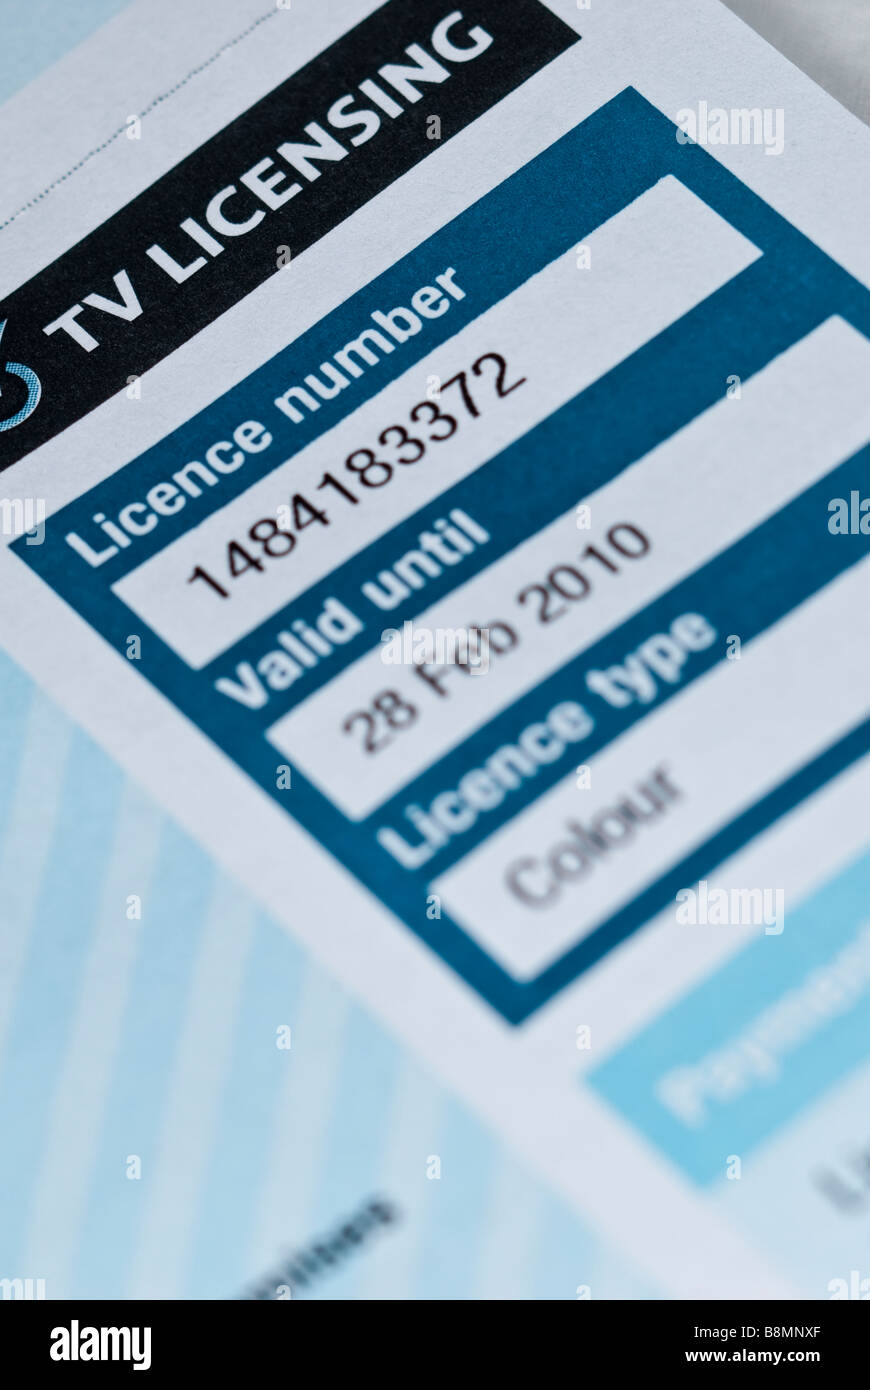 A close up of a uk tv television licence showing the issue number and expiry date Stock Photo